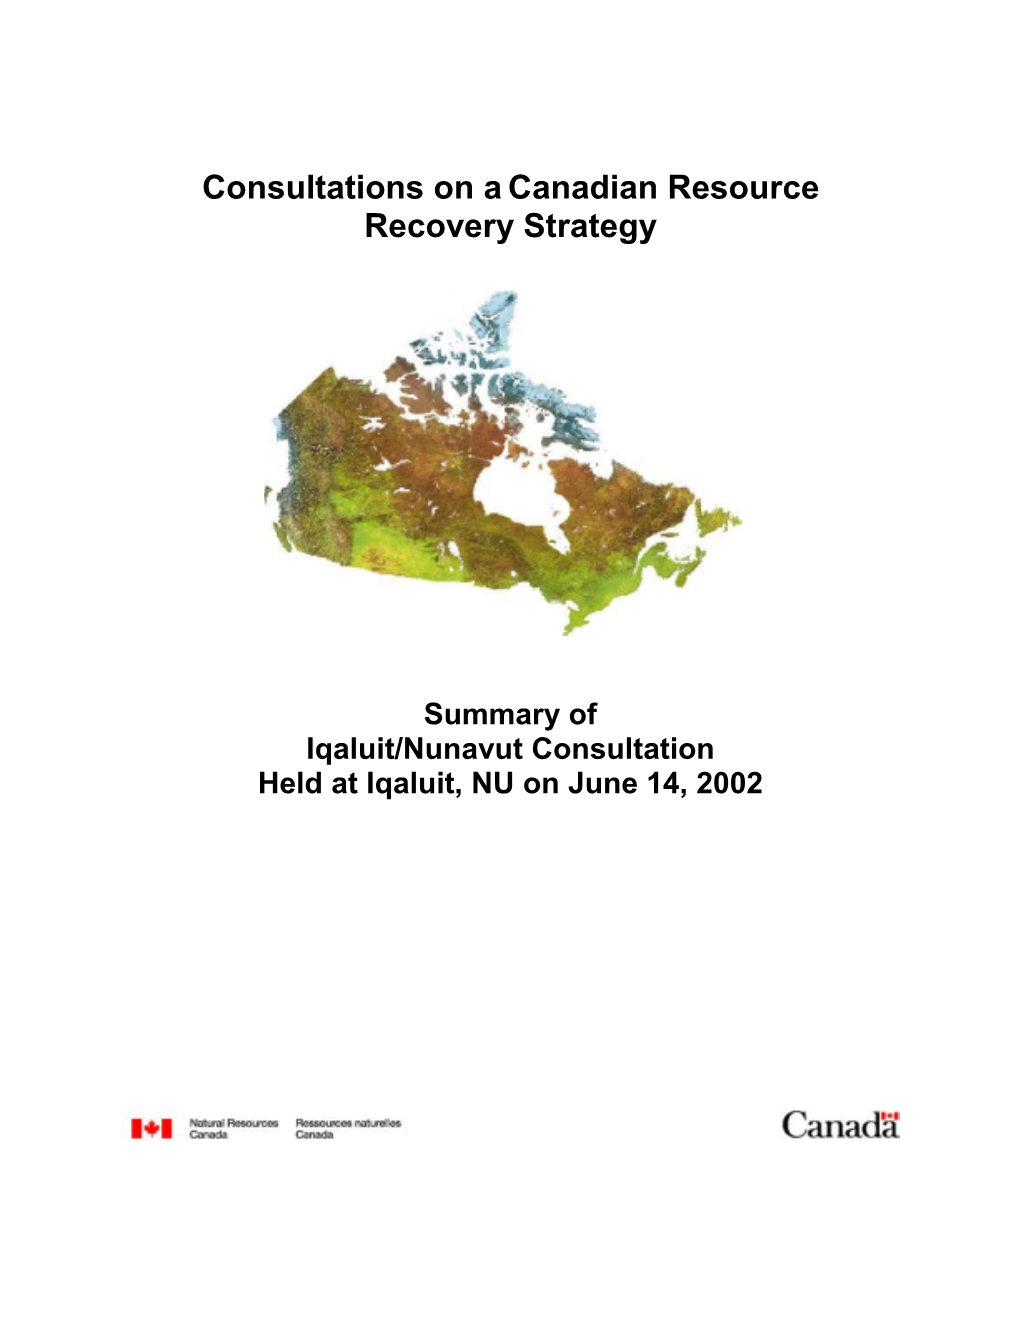 Consultations on a Canadian Resource Recovery Strategy